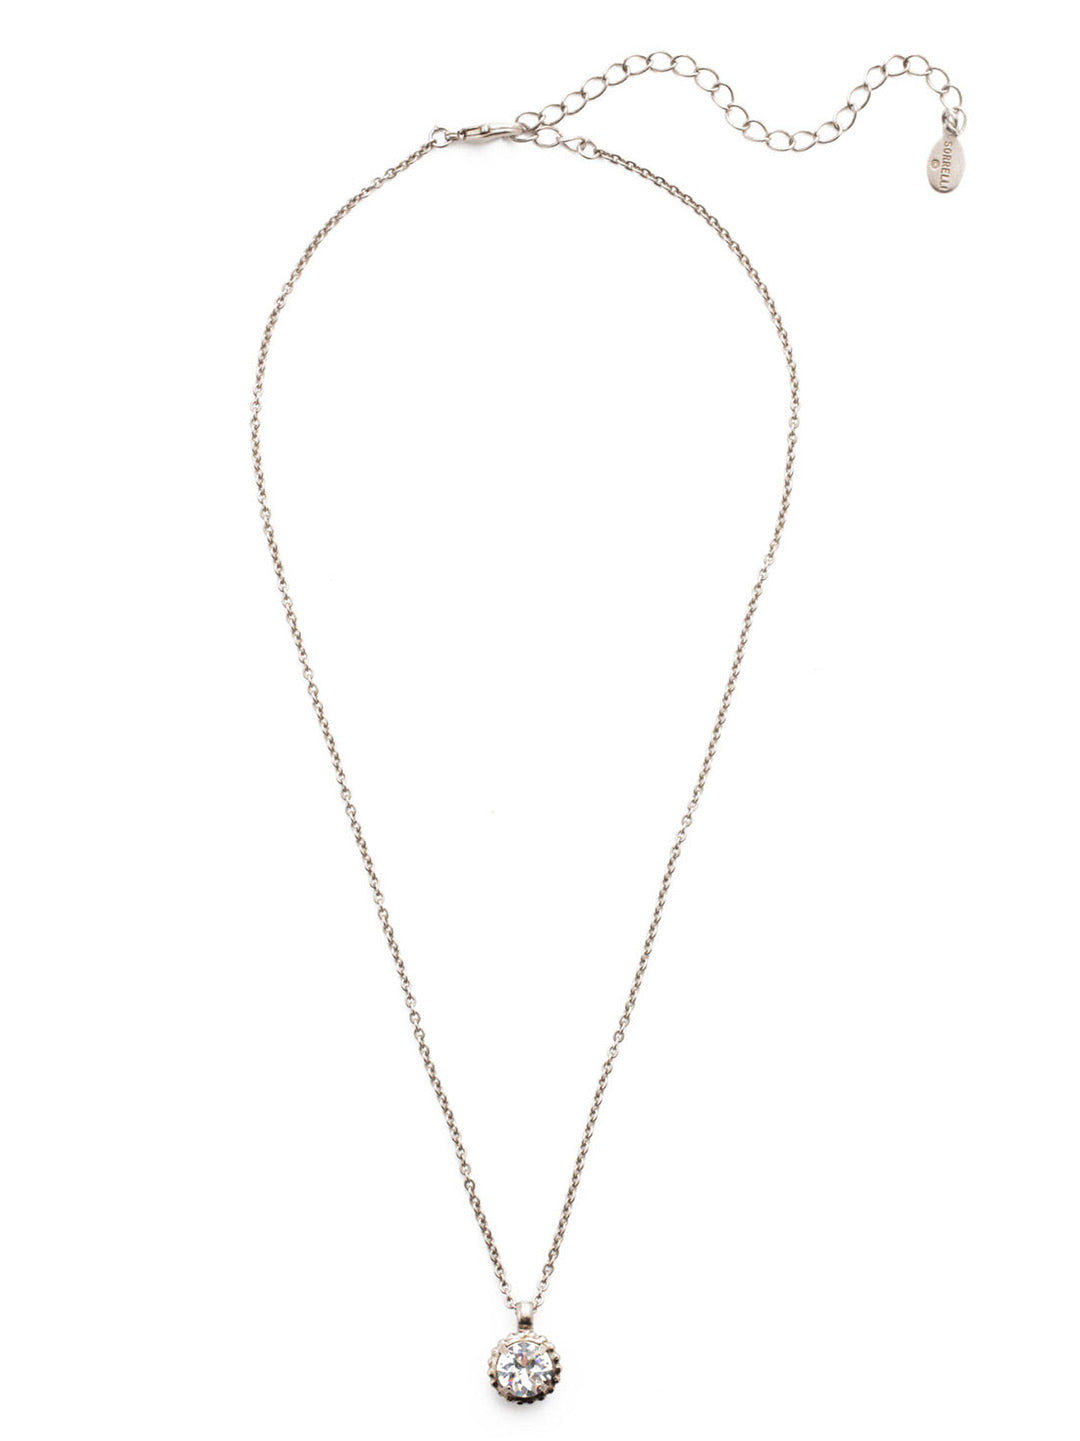 Simplicity Pendant Necklace - NBY38ASCRY - <p>Perfect for any day! The Simplicity Pendant Necklace features a round cut crystal with vintage edging. From Sorrelli's Crystal collection in our Antique Silver-tone finish.</p>